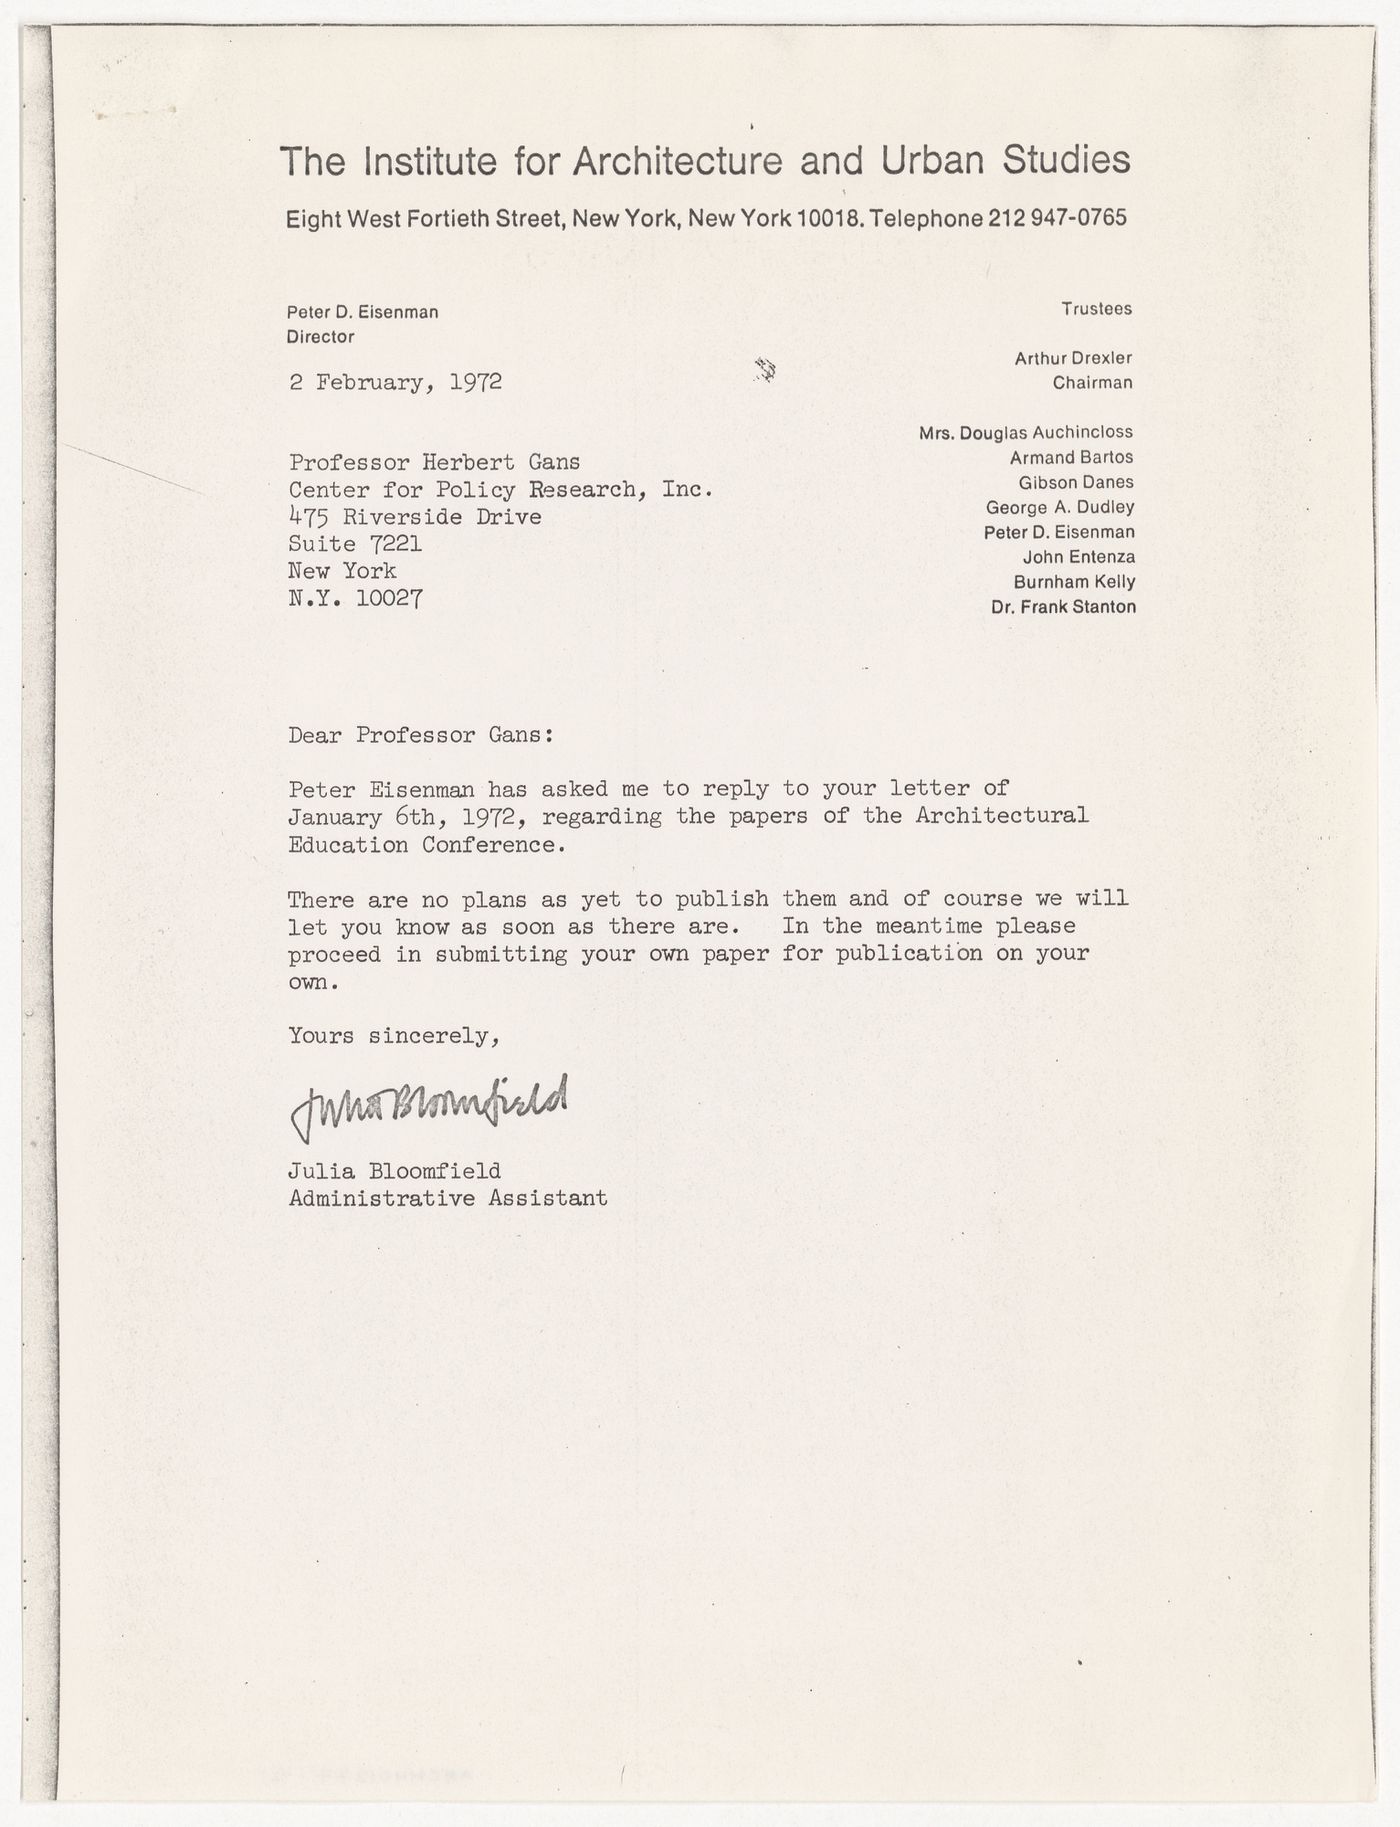 Letter from Julia Bloomfield to Herbert Gans about publication of papers from Architectural Education U.S.A. conference with attached letter from Herbert Gans to Peter D. Eisenman dated January 6th, 1972